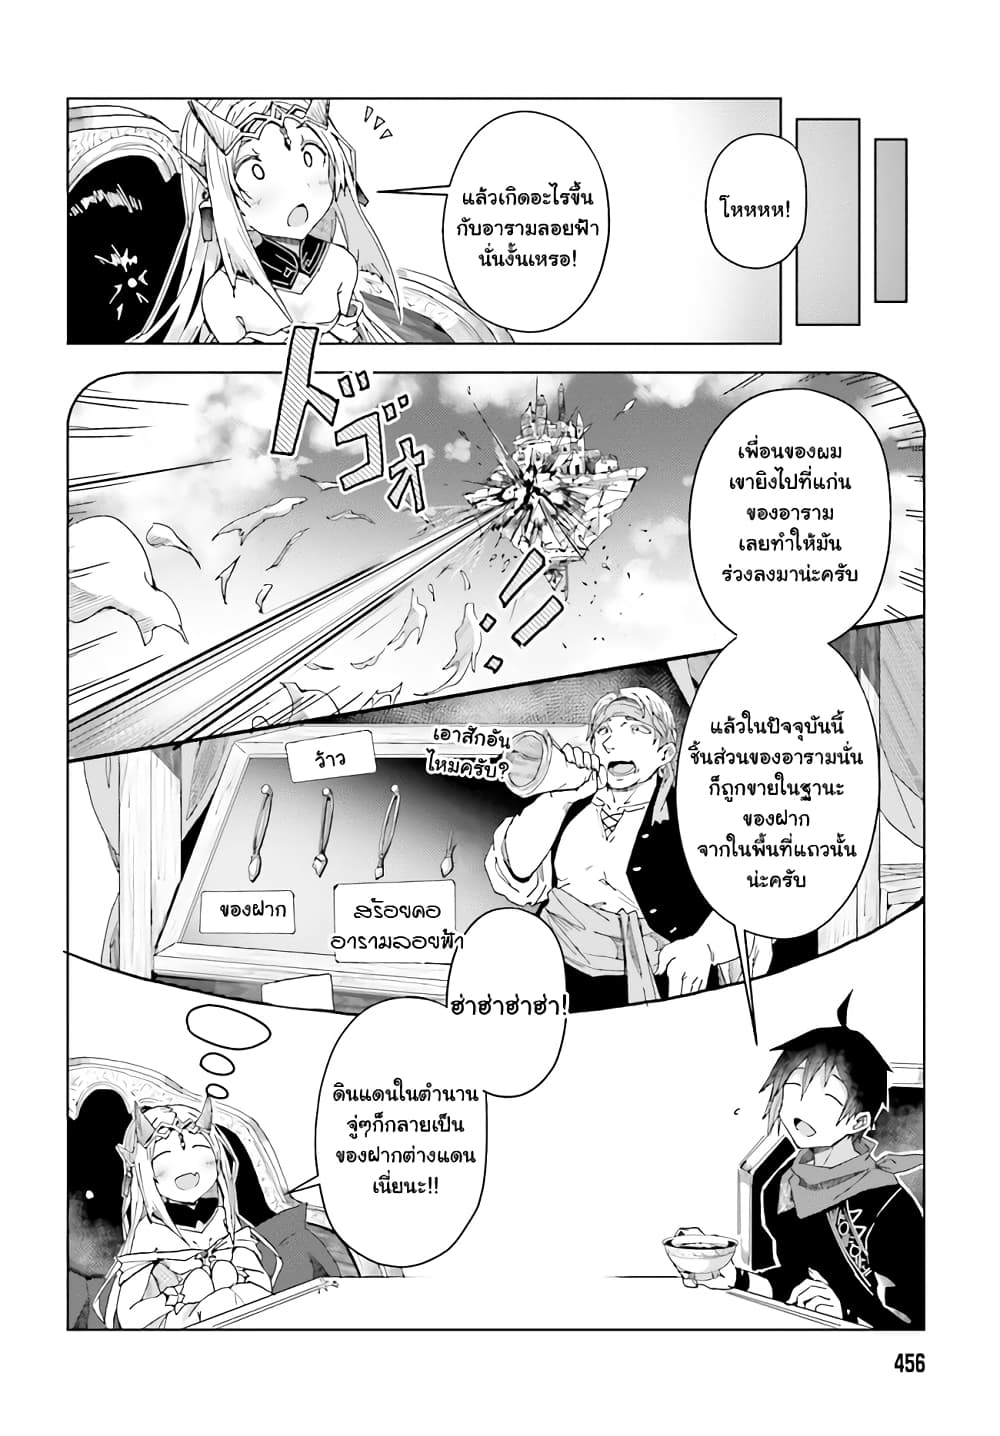 A Heroic Tale About Starting With a Personal ตอนที่ 3.1 (7)